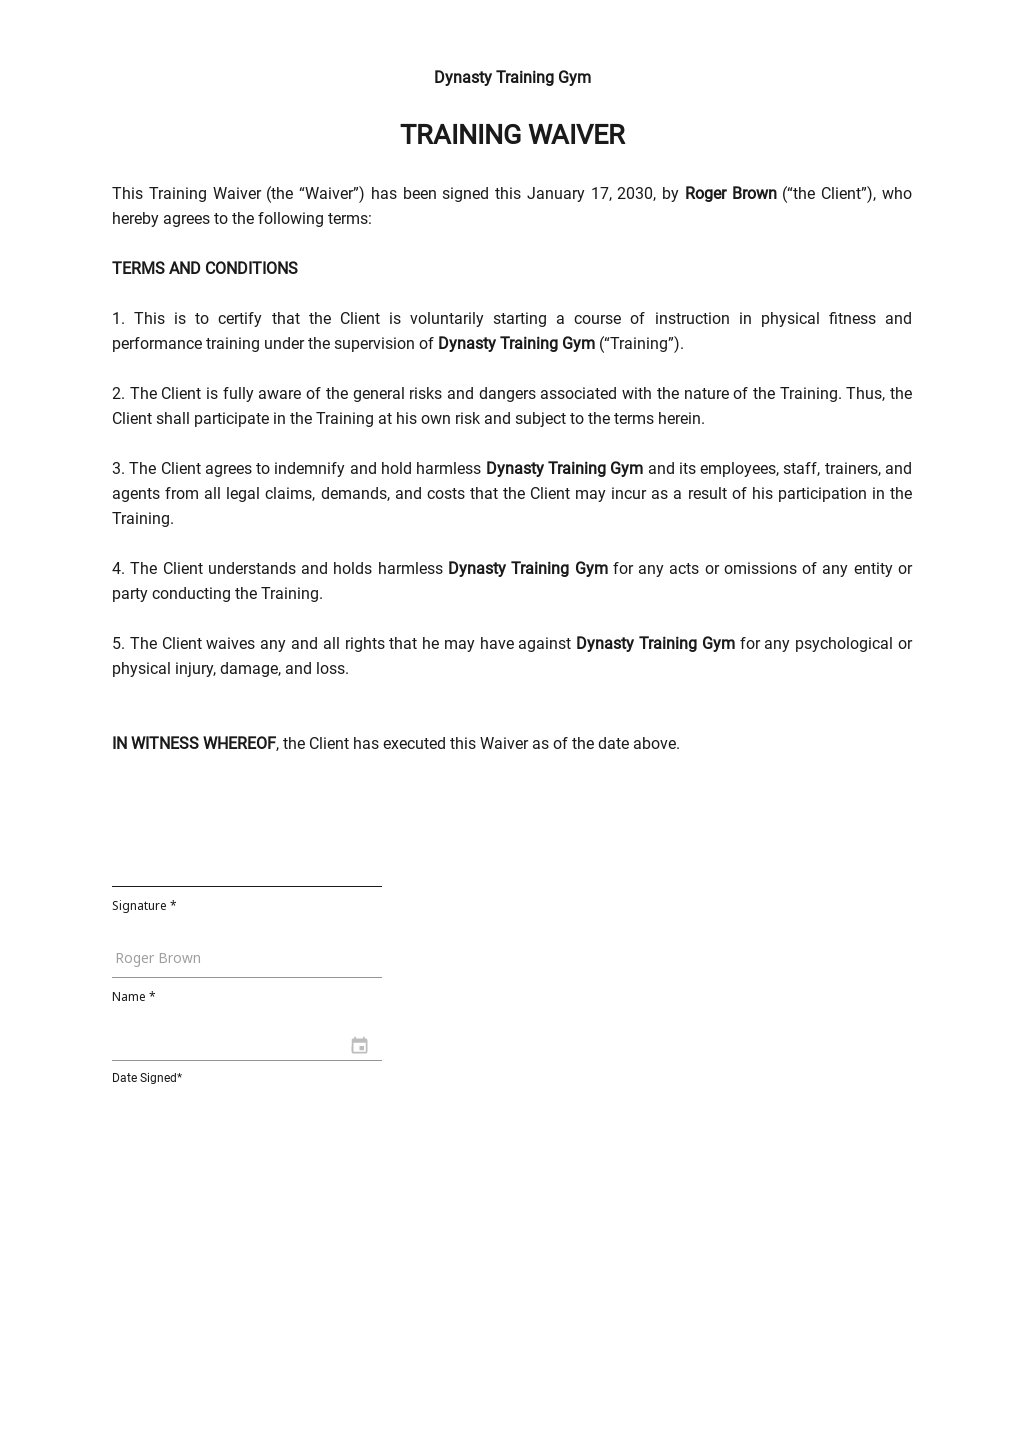 Training Waiver Template in Google Docs Word Download Template net